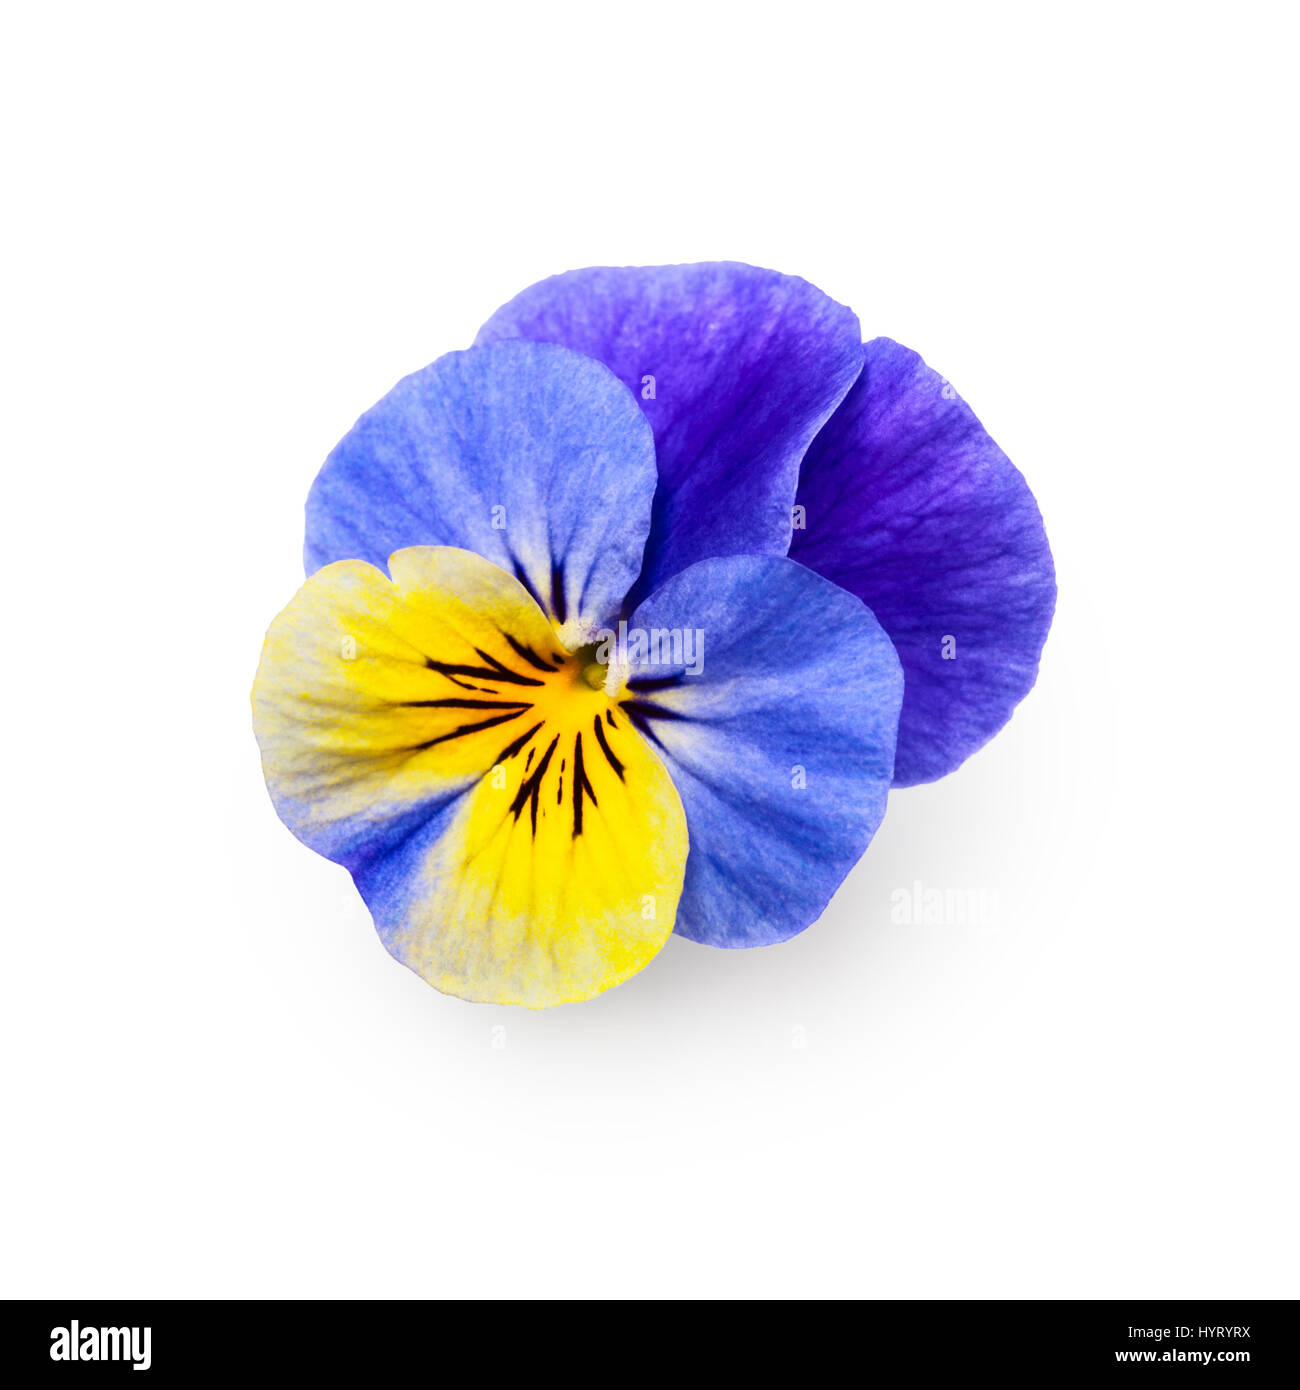 Pansy viola tricolor flower isolated on white background clipping path included, top view Stock Photo